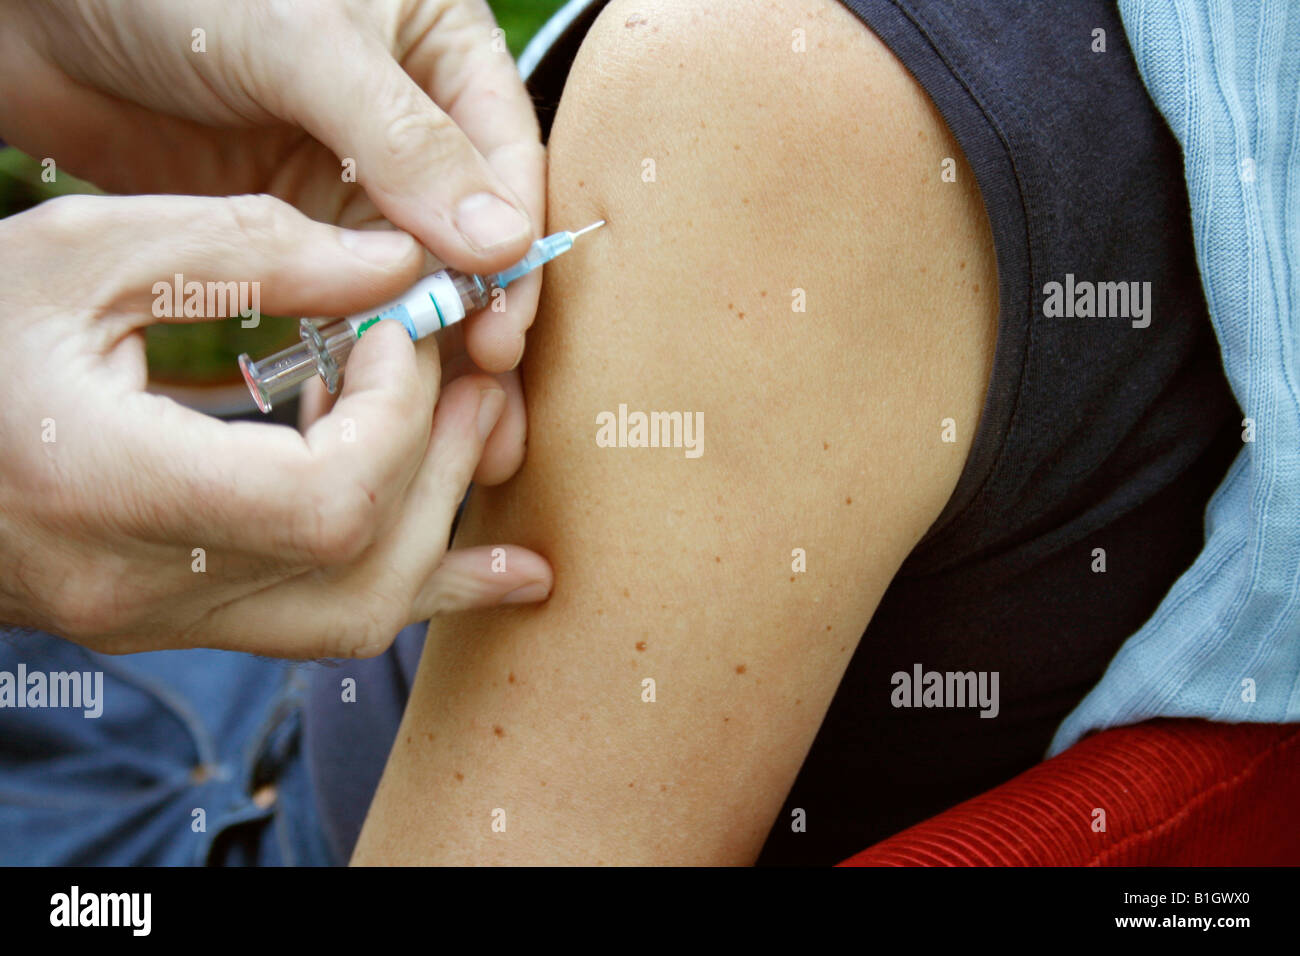 giving an intramuscular injection in arm Stock Photo